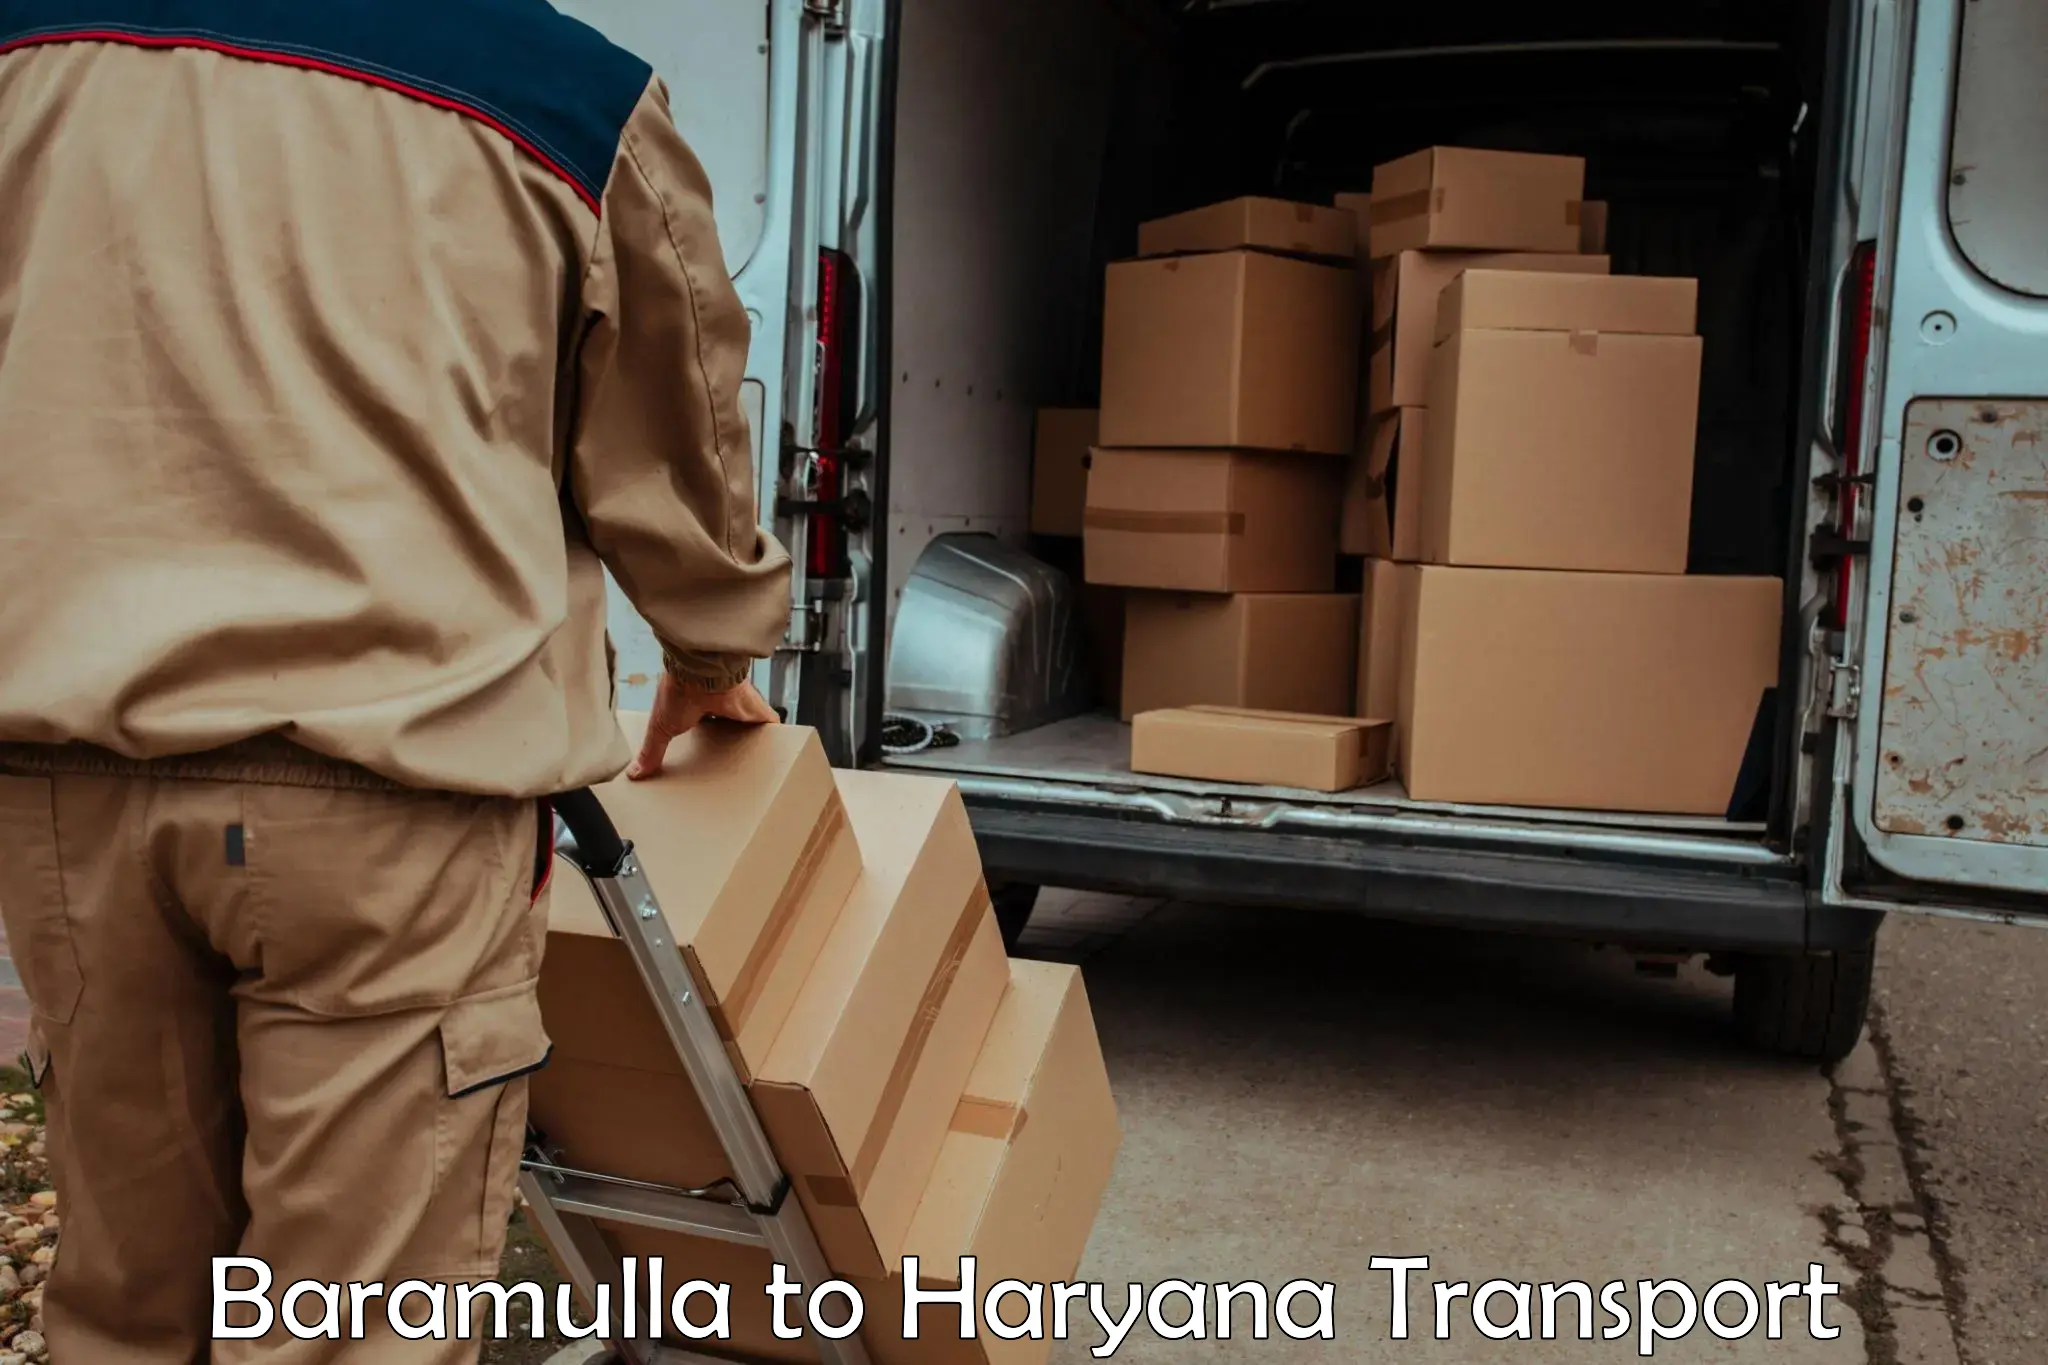 Road transport online services in Baramulla to NCR Haryana